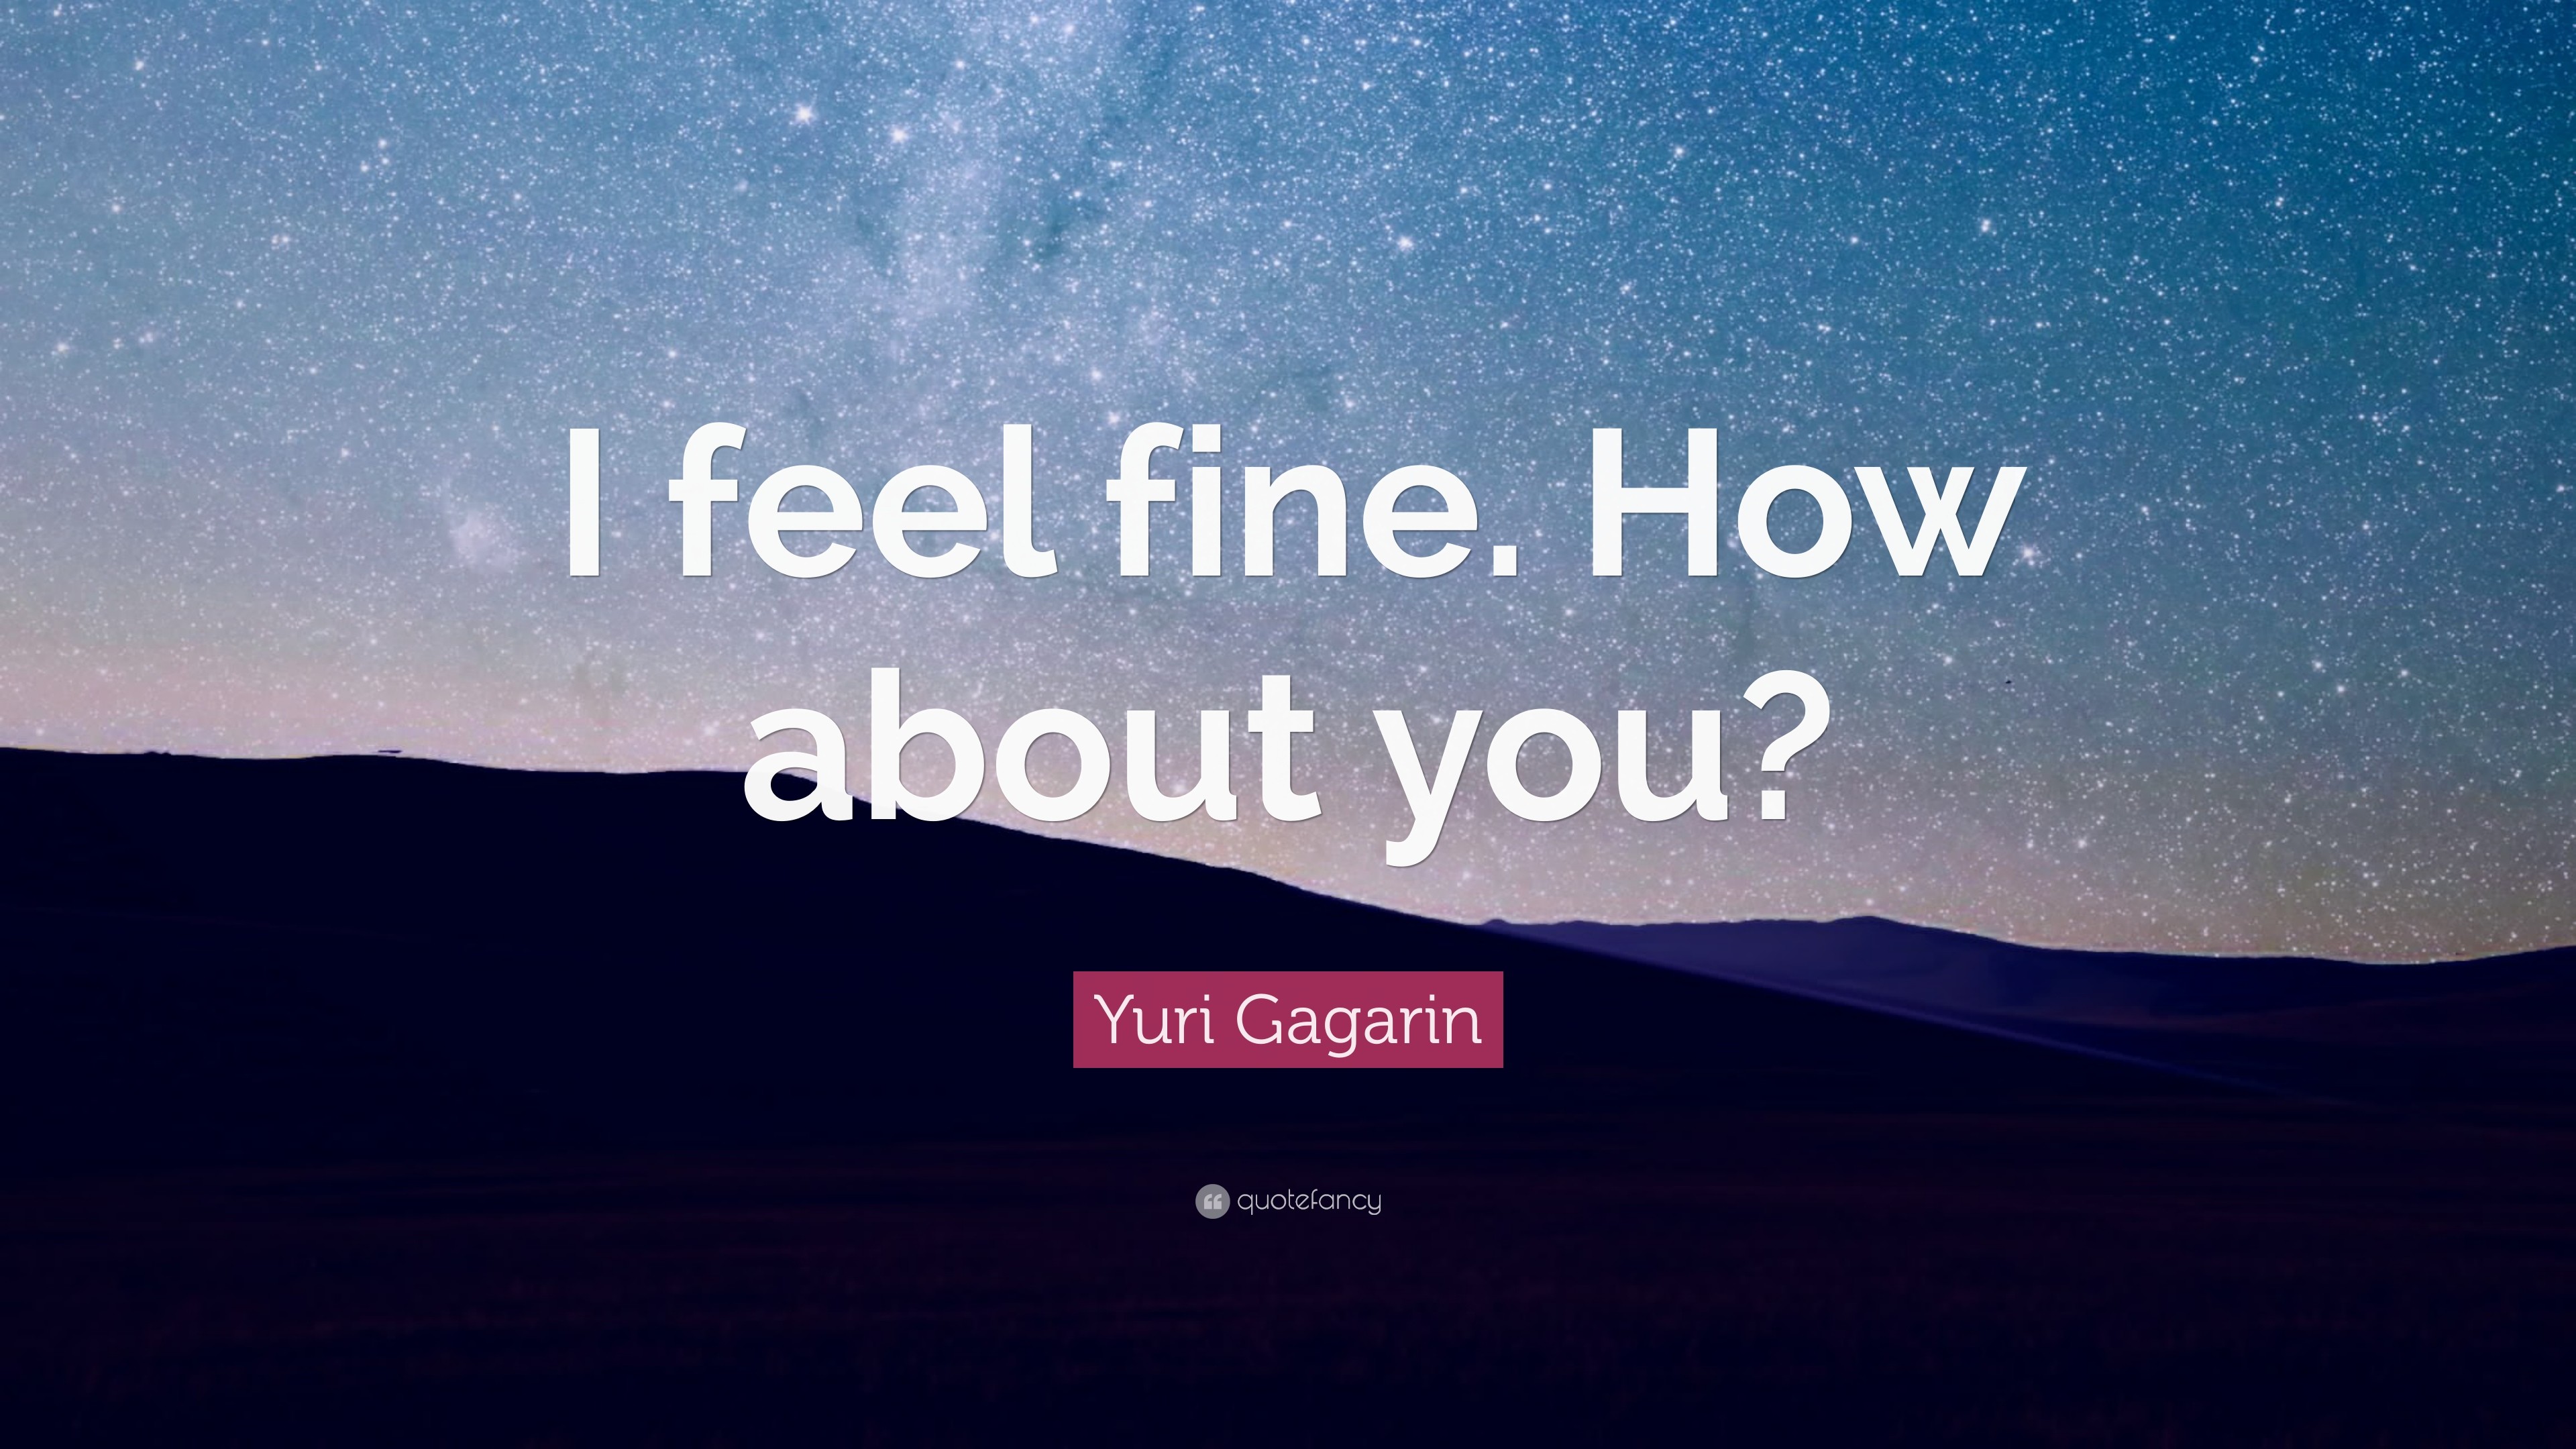 3840x2160 Yuri Gagarin Quote: “I feel fine. How about you?”